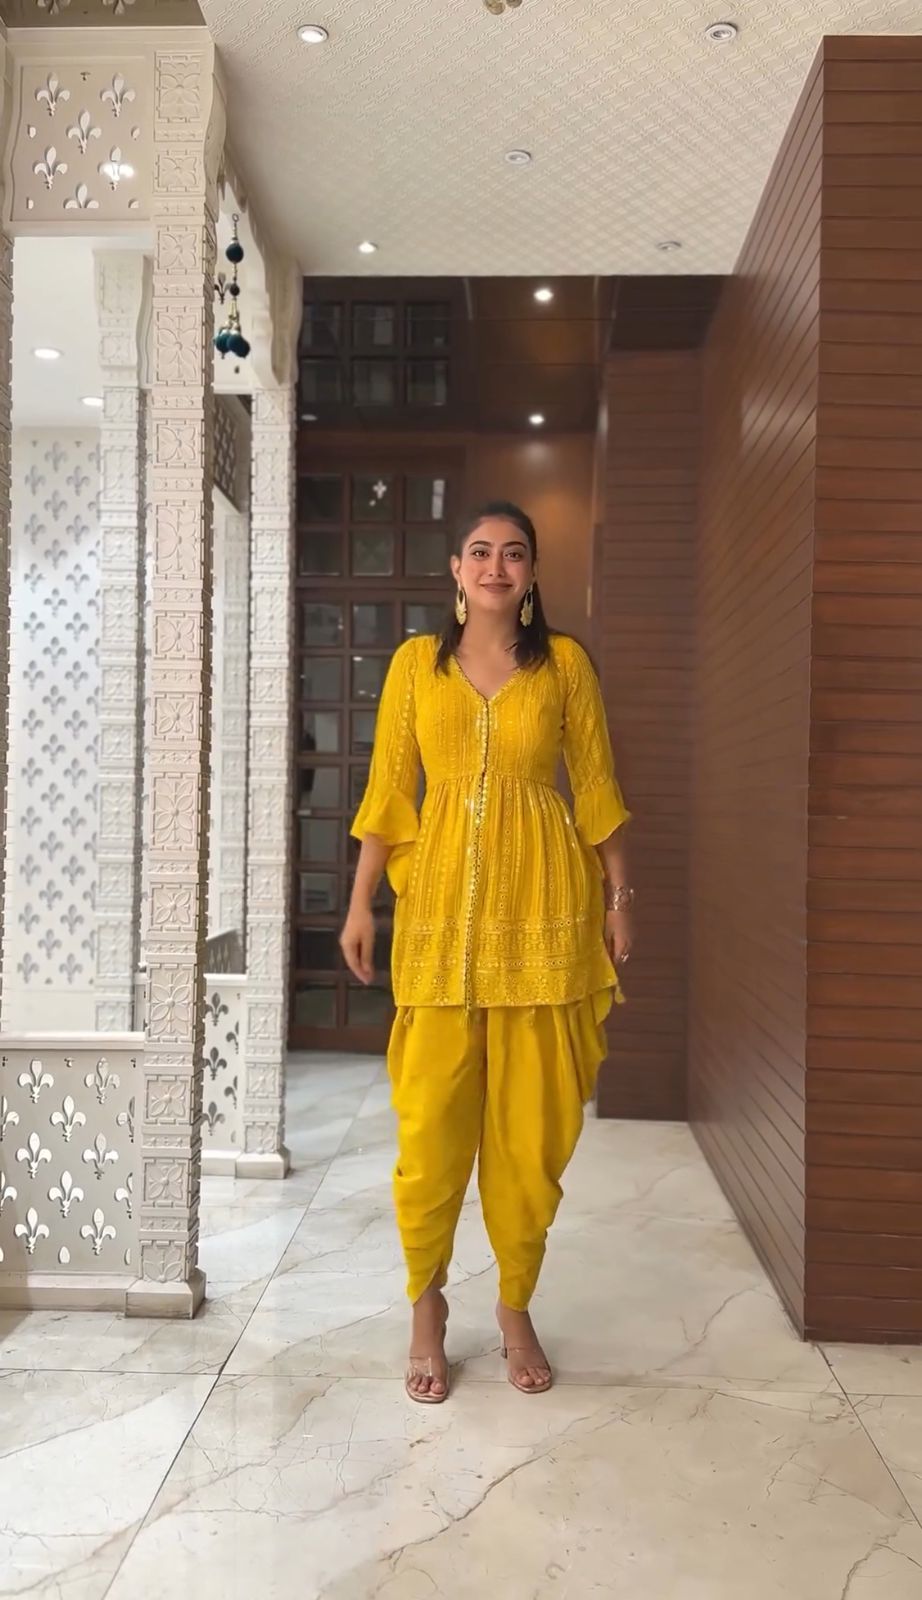 Sun Yellow Dhoti Suit With Layered Peplum Top Having Colorful Resham  Flowers And Overlapping Neckline Online - Kalki Fashion | Designer outfits  woman, Party wear indian dresses, Traditional indian dress